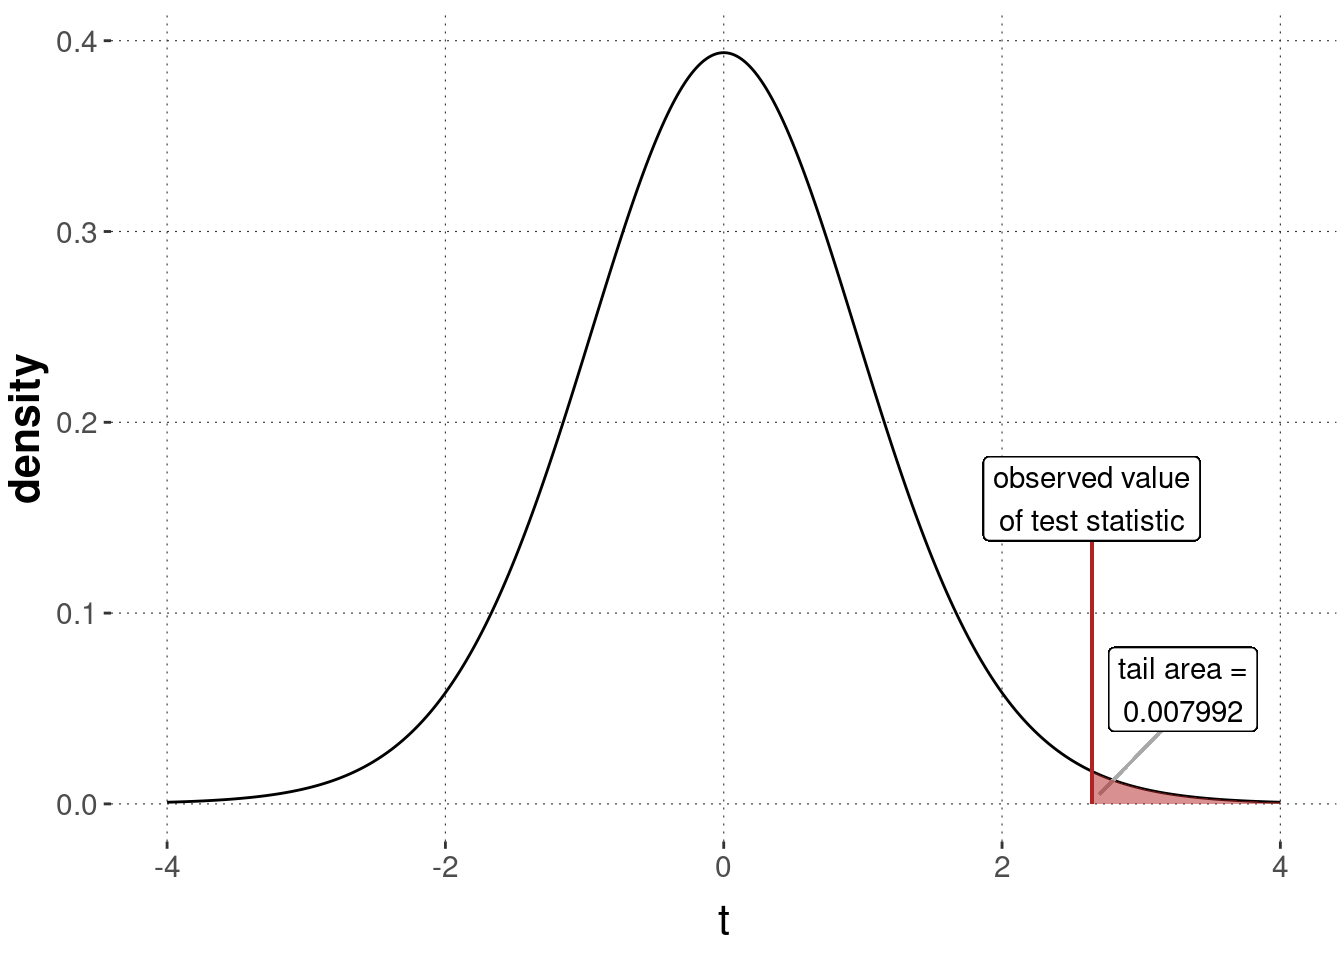 Sampling distribution for a $t$-test, testing the null hypothesis that the IQ-data was generated by $\mu = 100$ (with unknown $\sigma$).